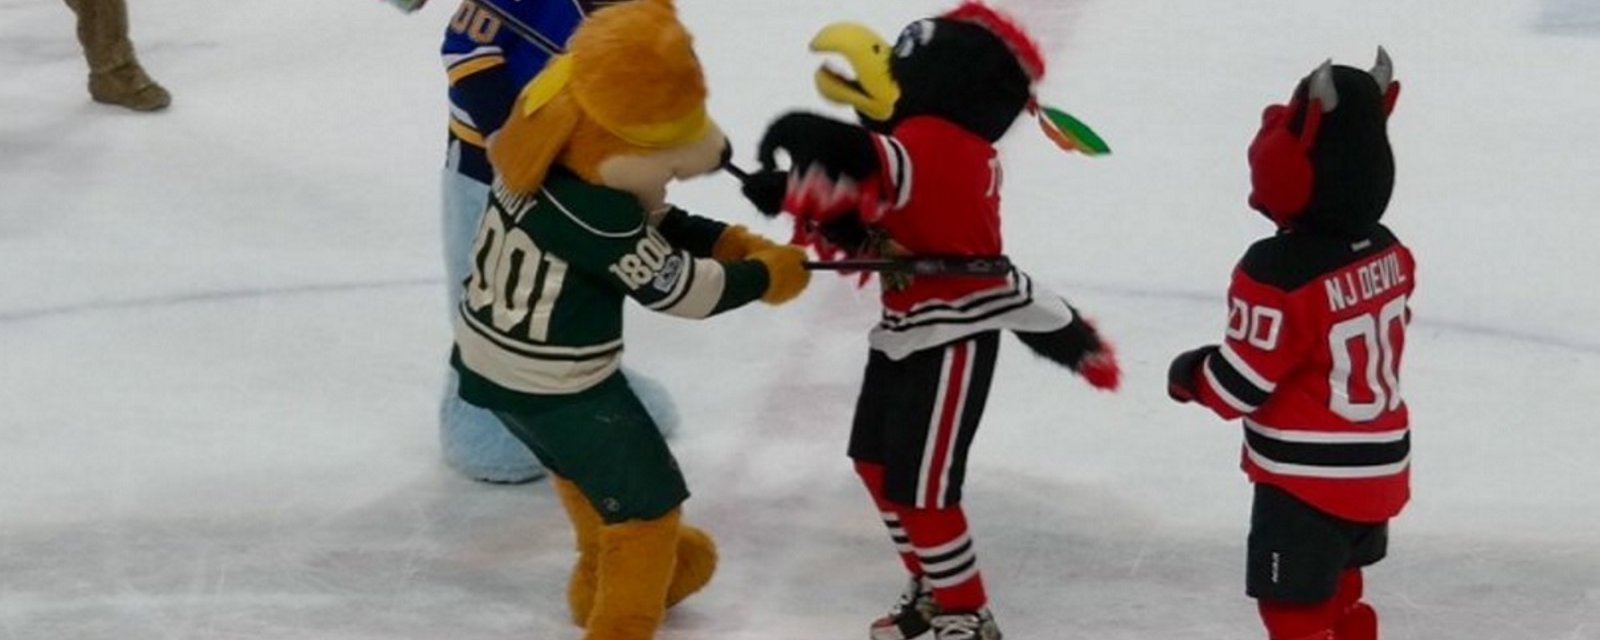 Reports of outrage after “violent” mascot incident in the NHL last night.